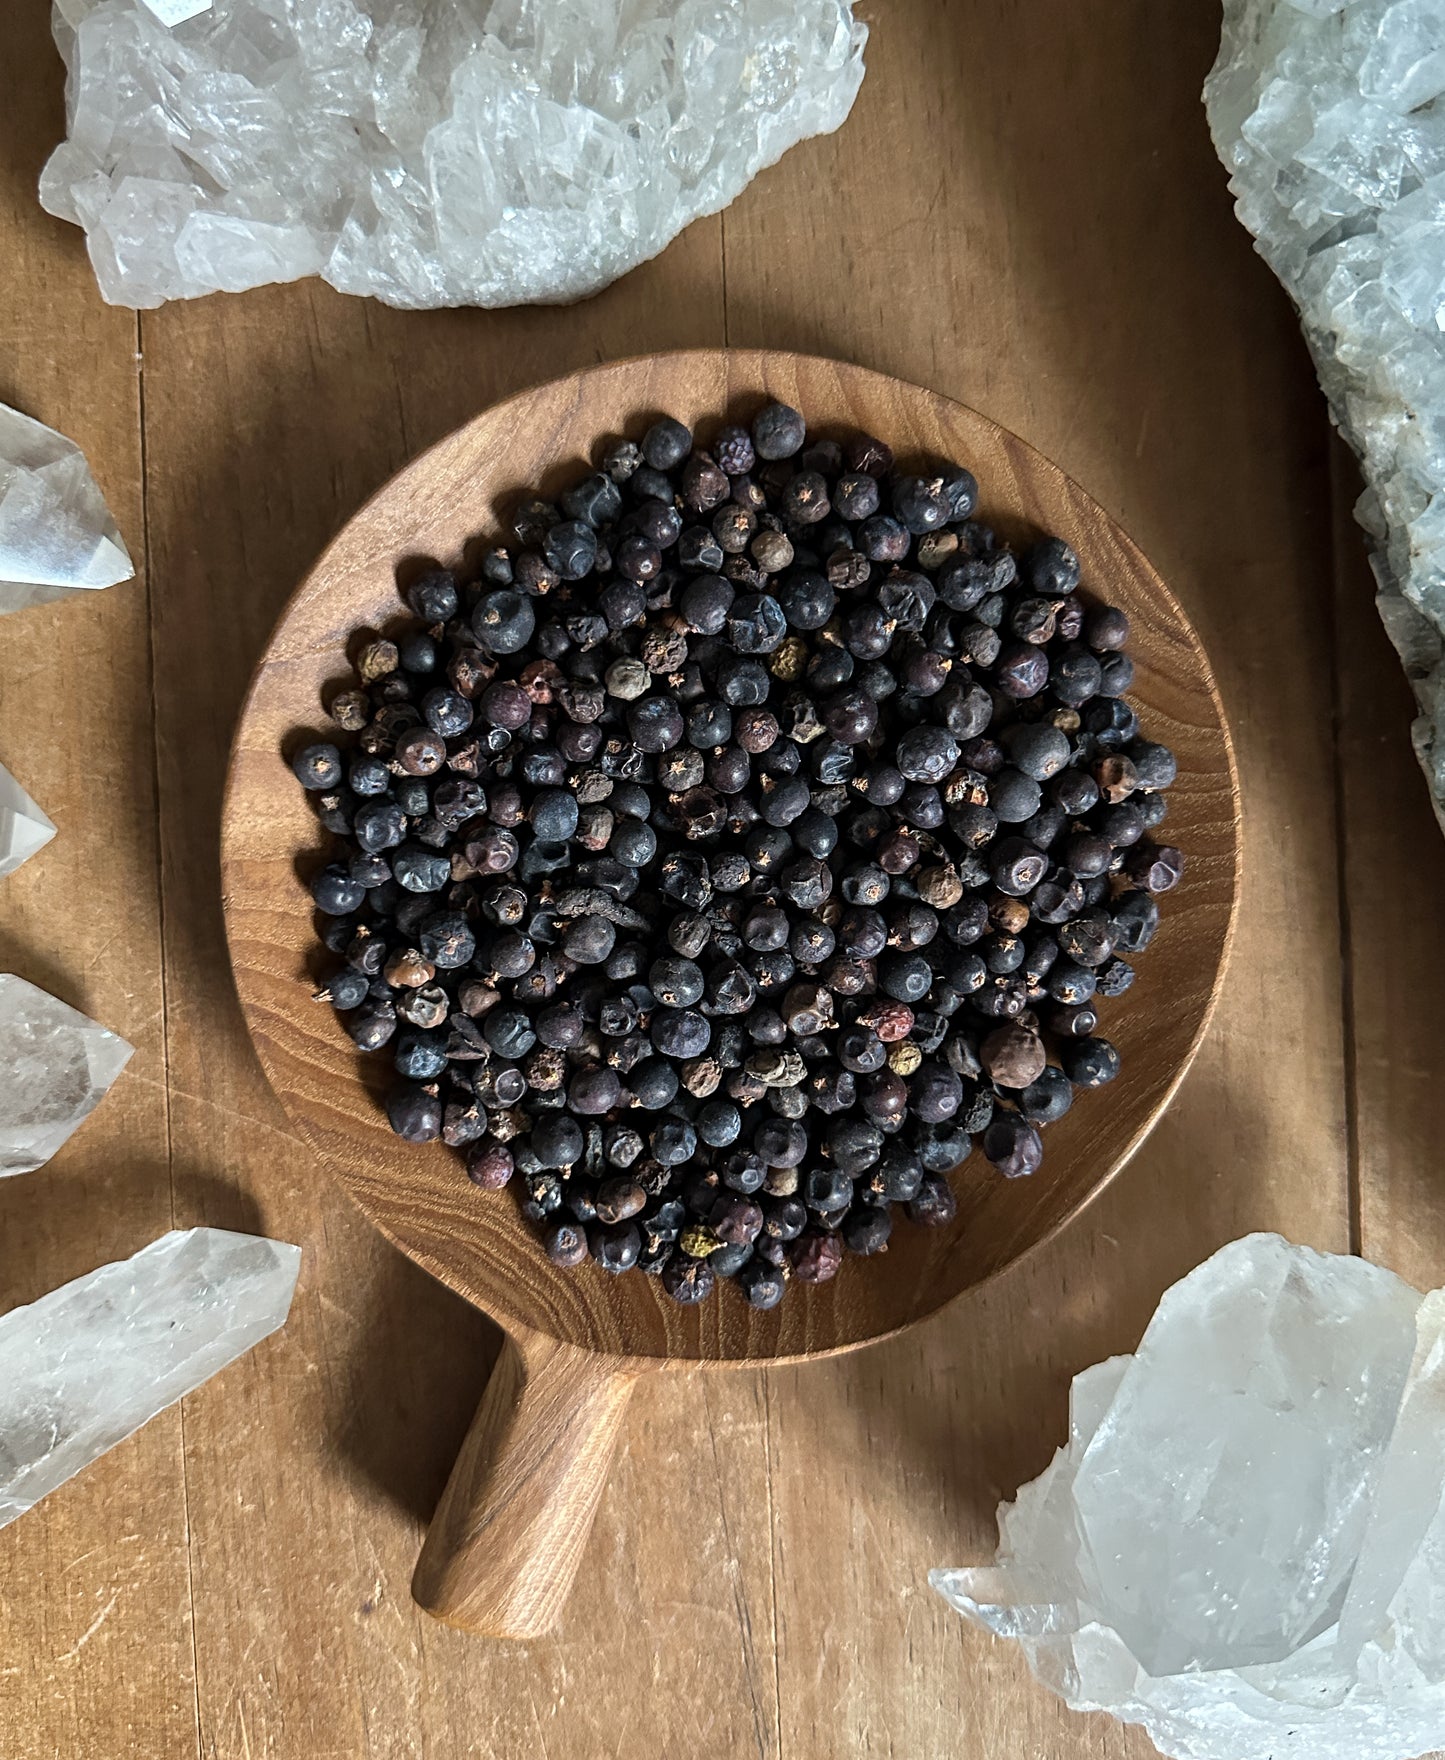 Juniper Berries are often associated with Good Health, Clarity, Love, Protection, Wisdom, Purification, Banishing, Relaxation and Emotional Healing.